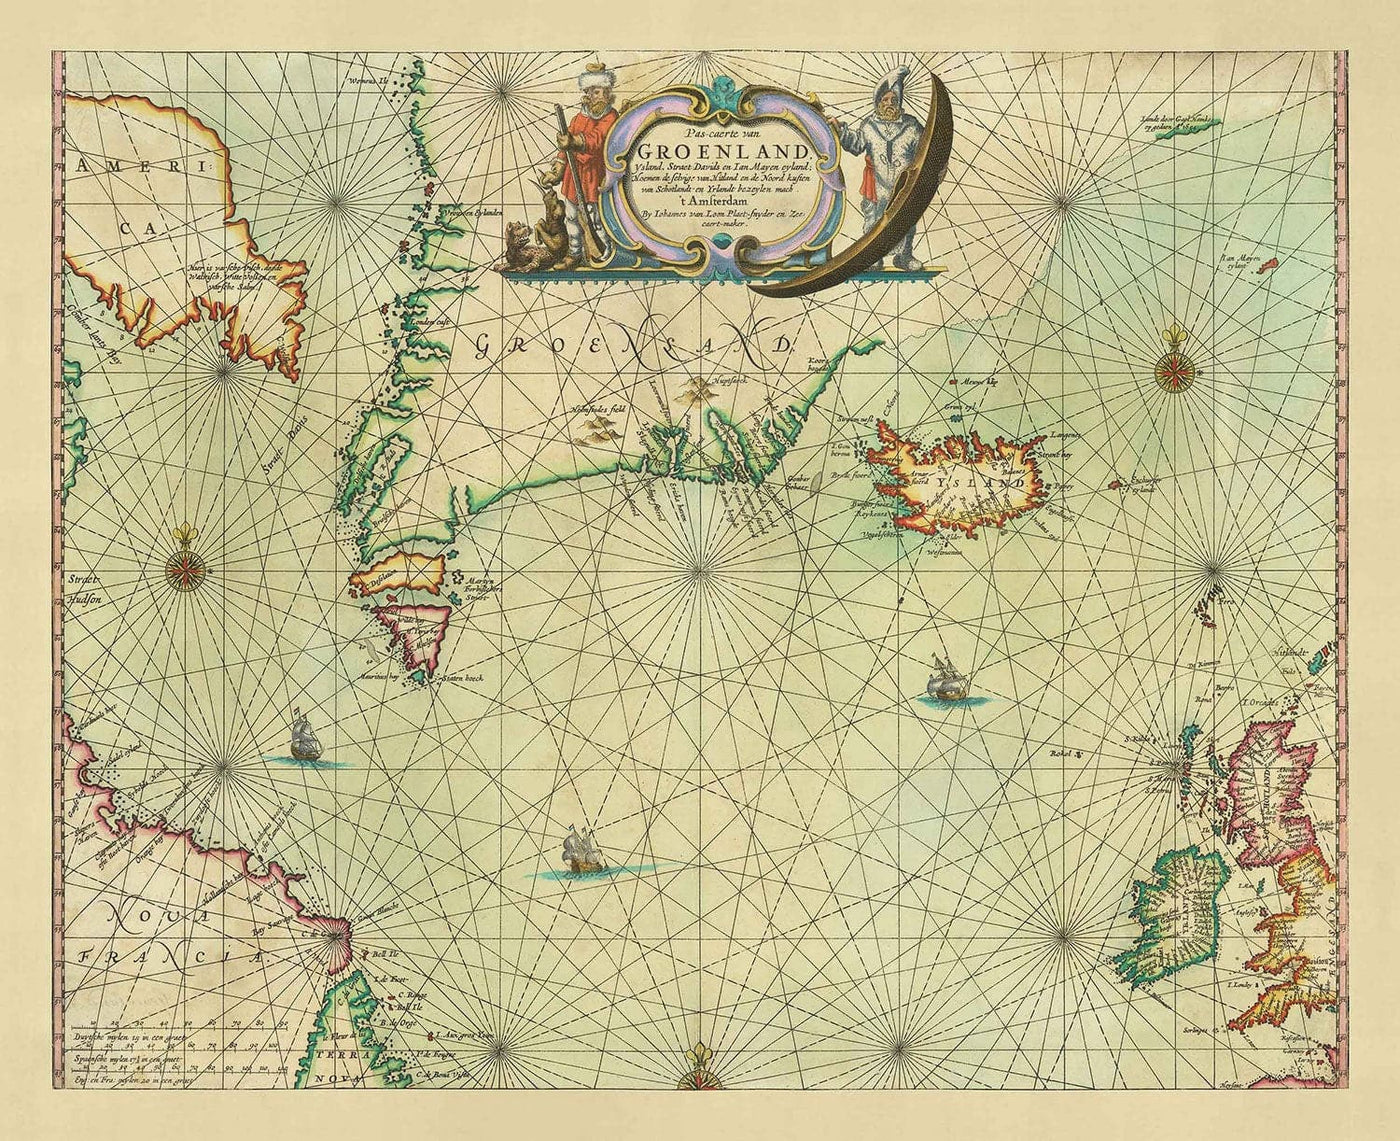 Old Map of Greenland, Iceland & North Sea, 1661 by van Loon - Viking Exploration Chart